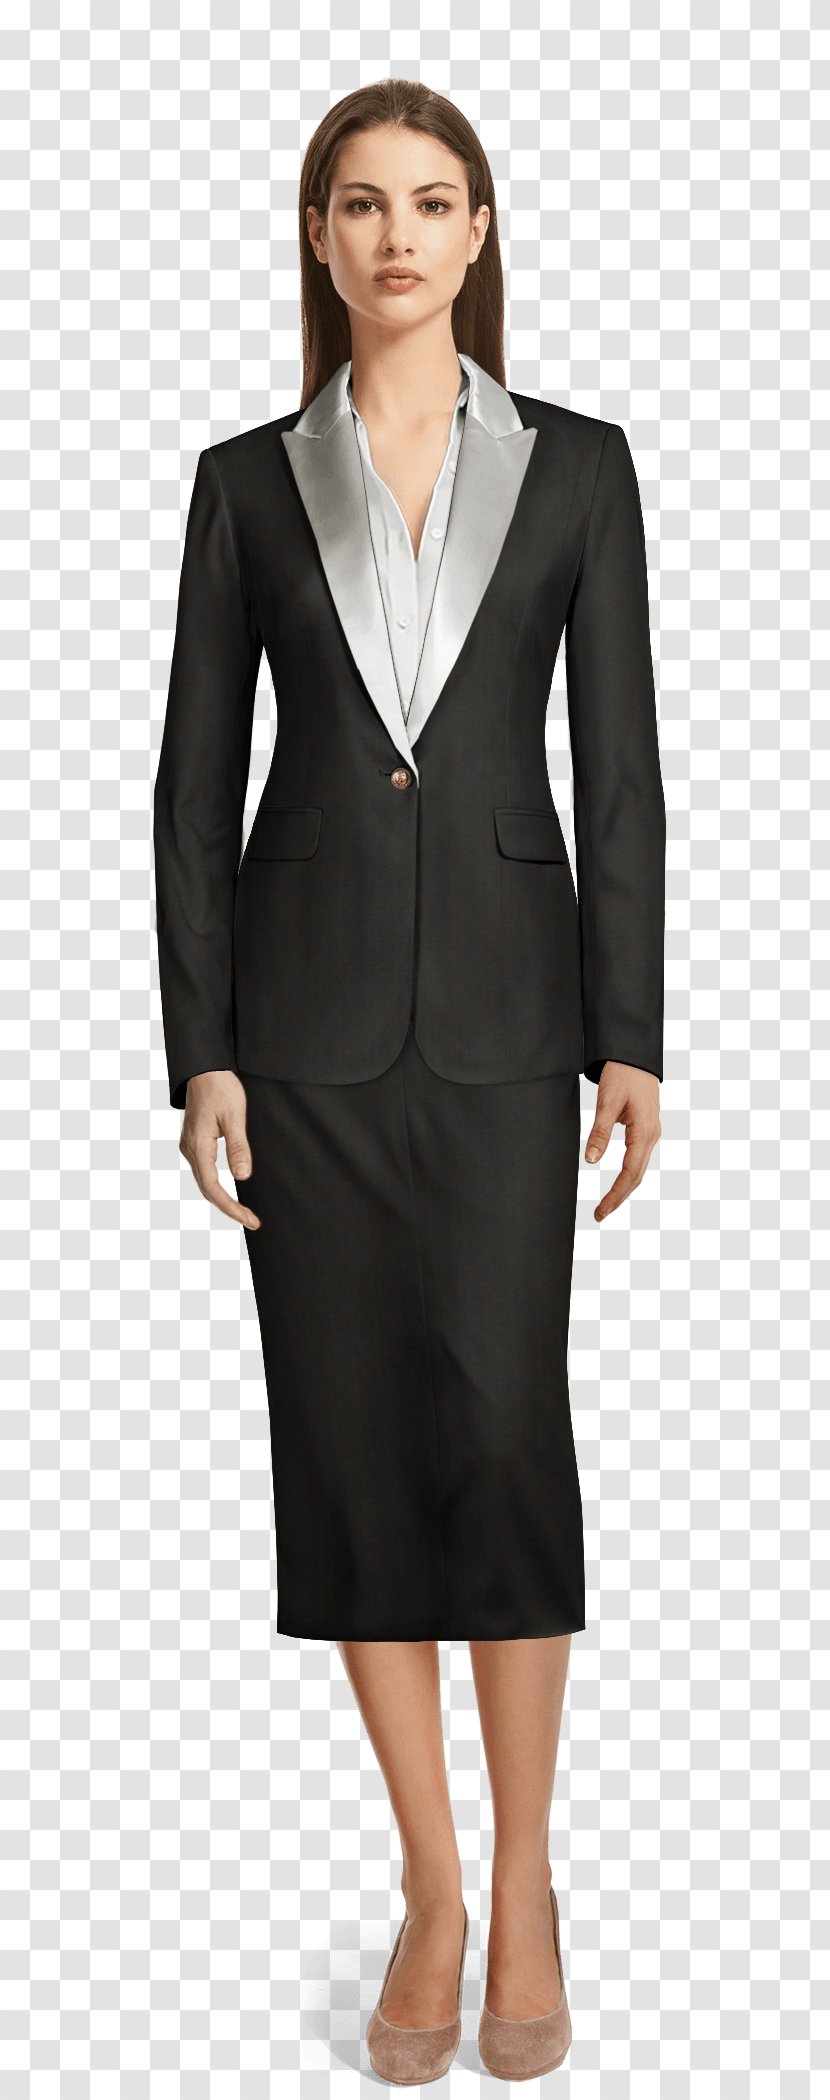 Tuxedo Lapel Suit Double-breasted Single-breasted - Singlebreasted Transparent PNG